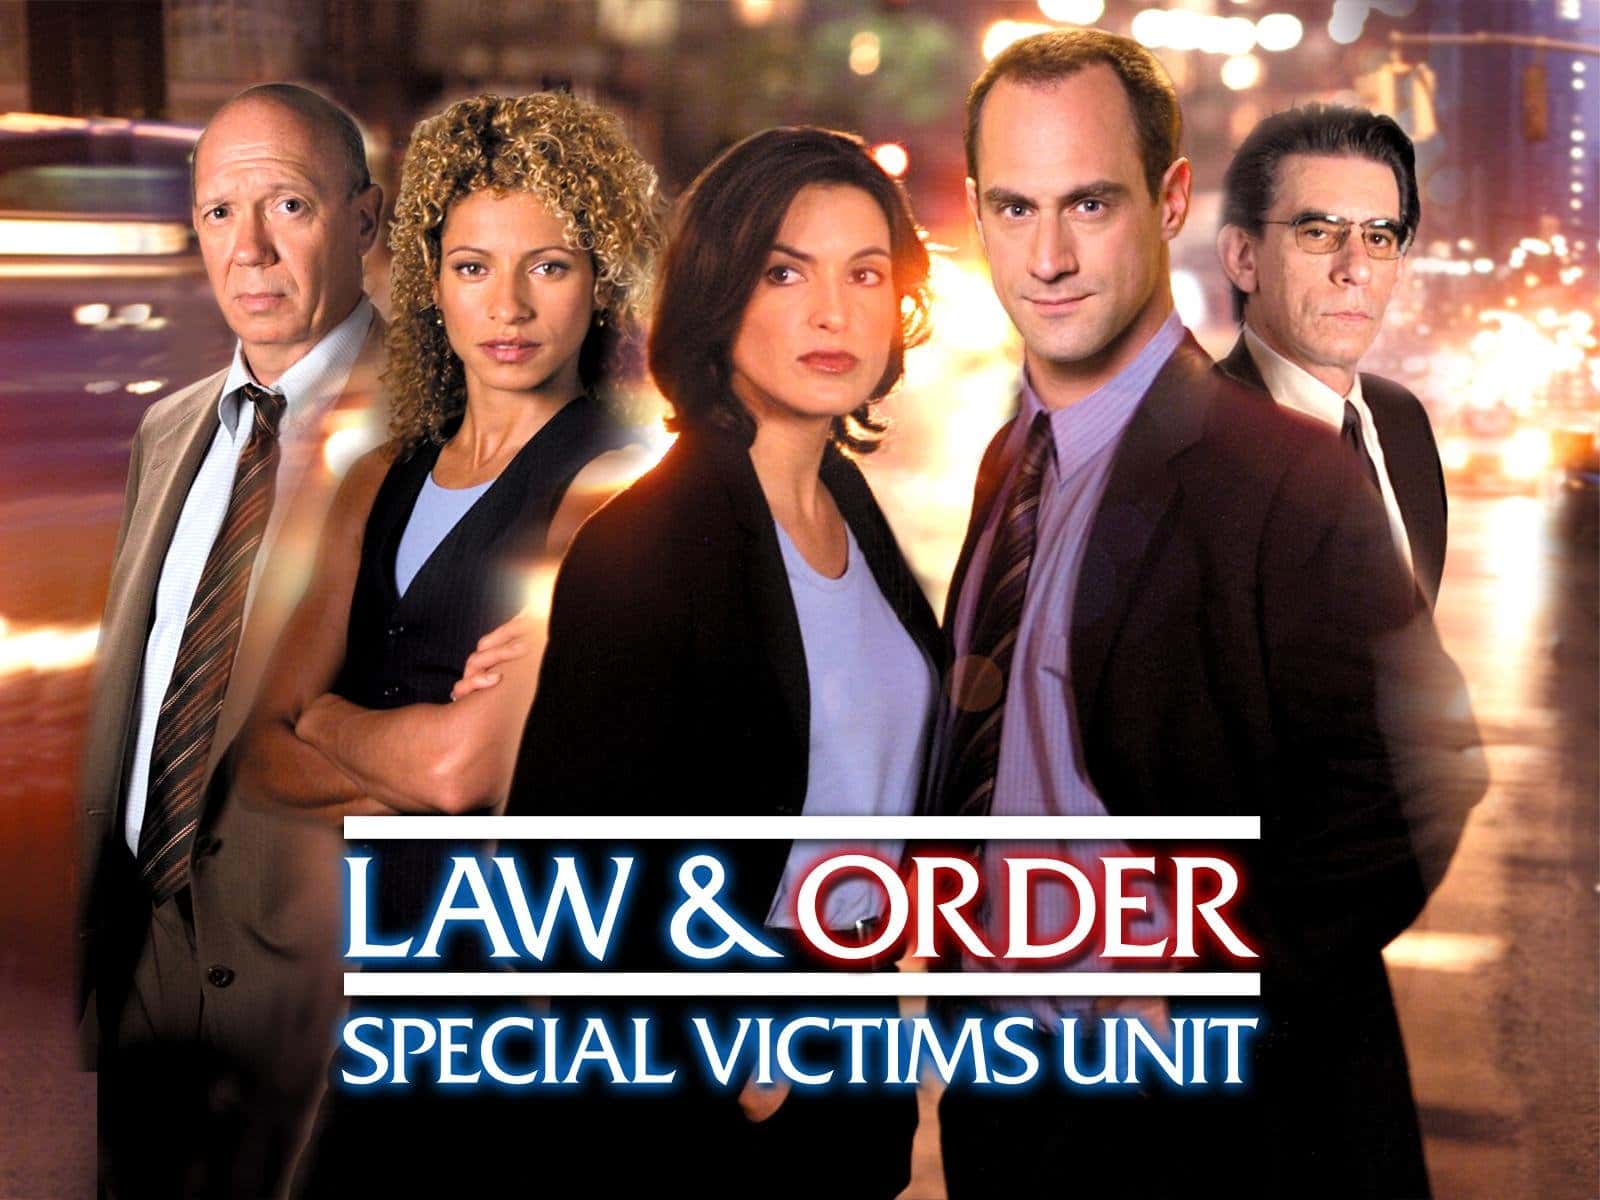 Law And Order Svu Episode Schedule - Law & Order: Special Victims Unit